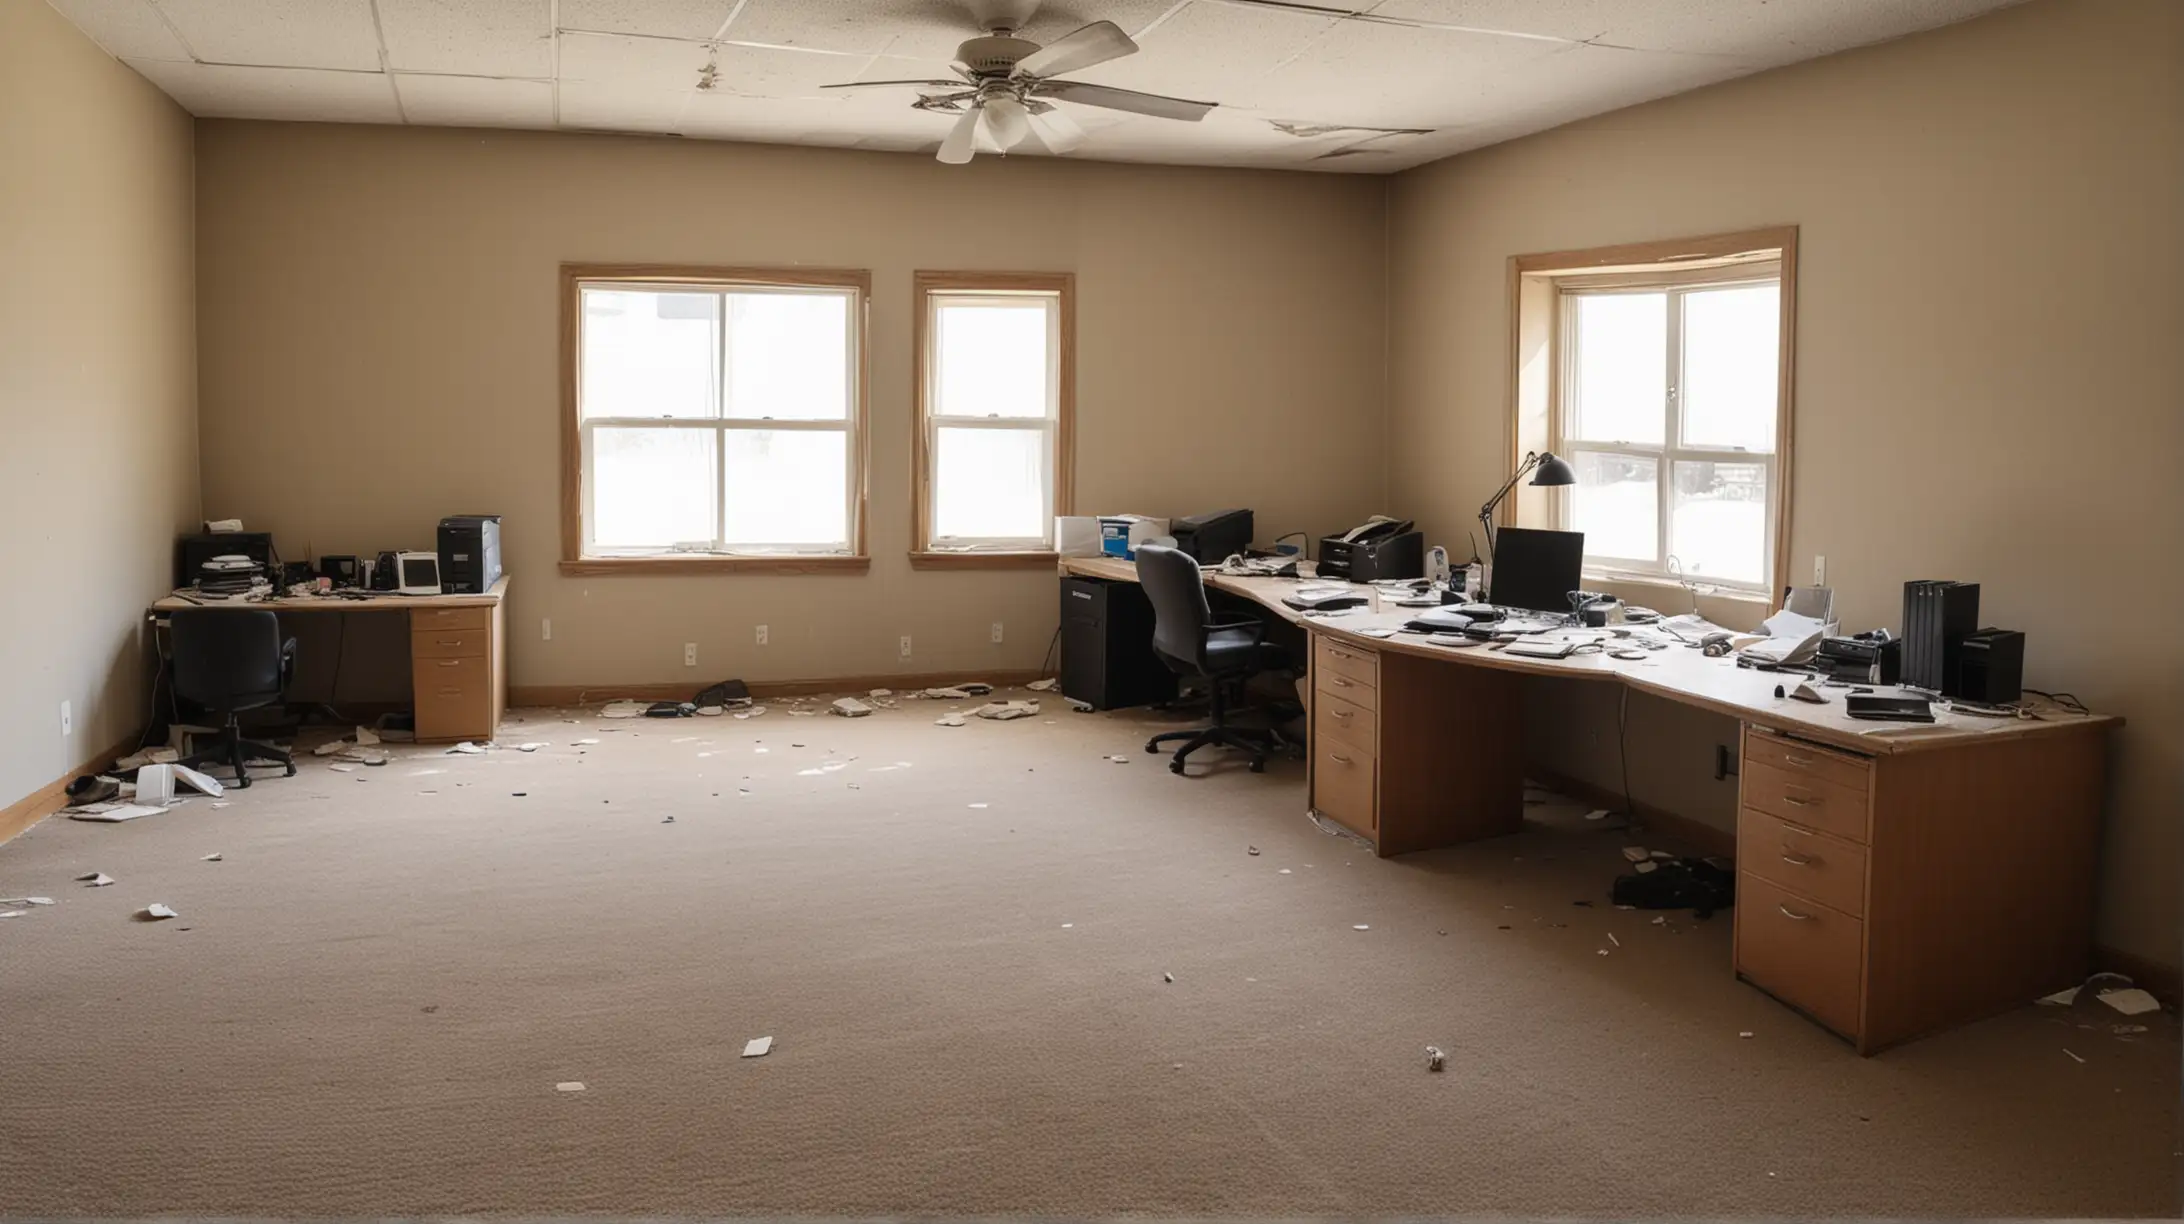 Dusty office room. before and after


